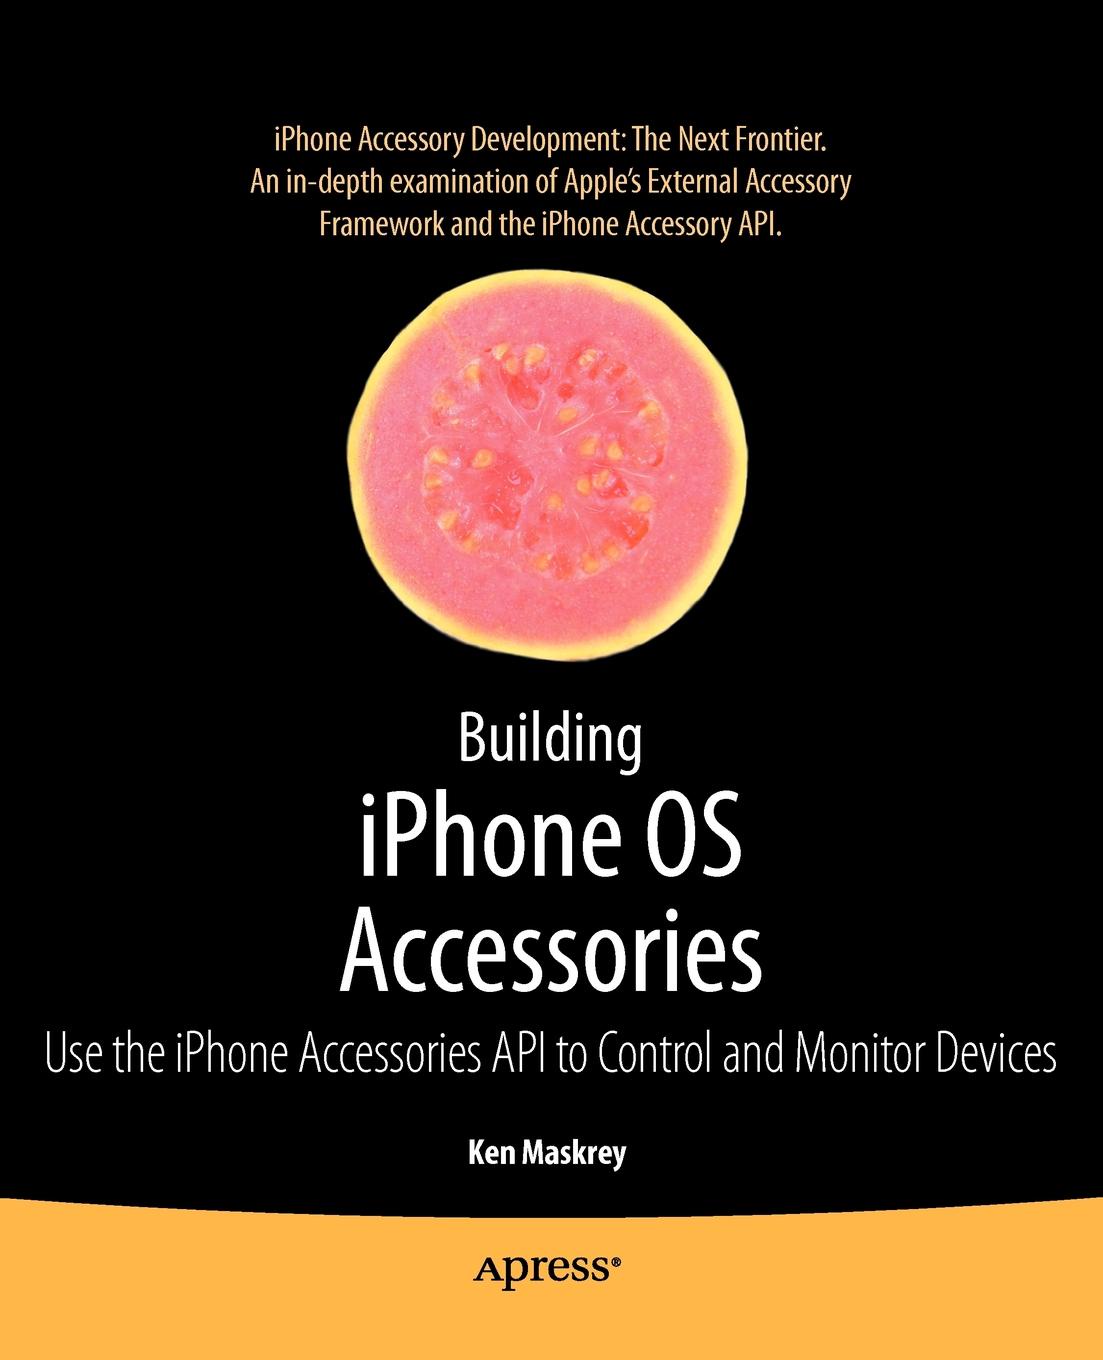 Building iPhone OS Accessories. Use the iPhone Accessories API to Control and Monitor Devices